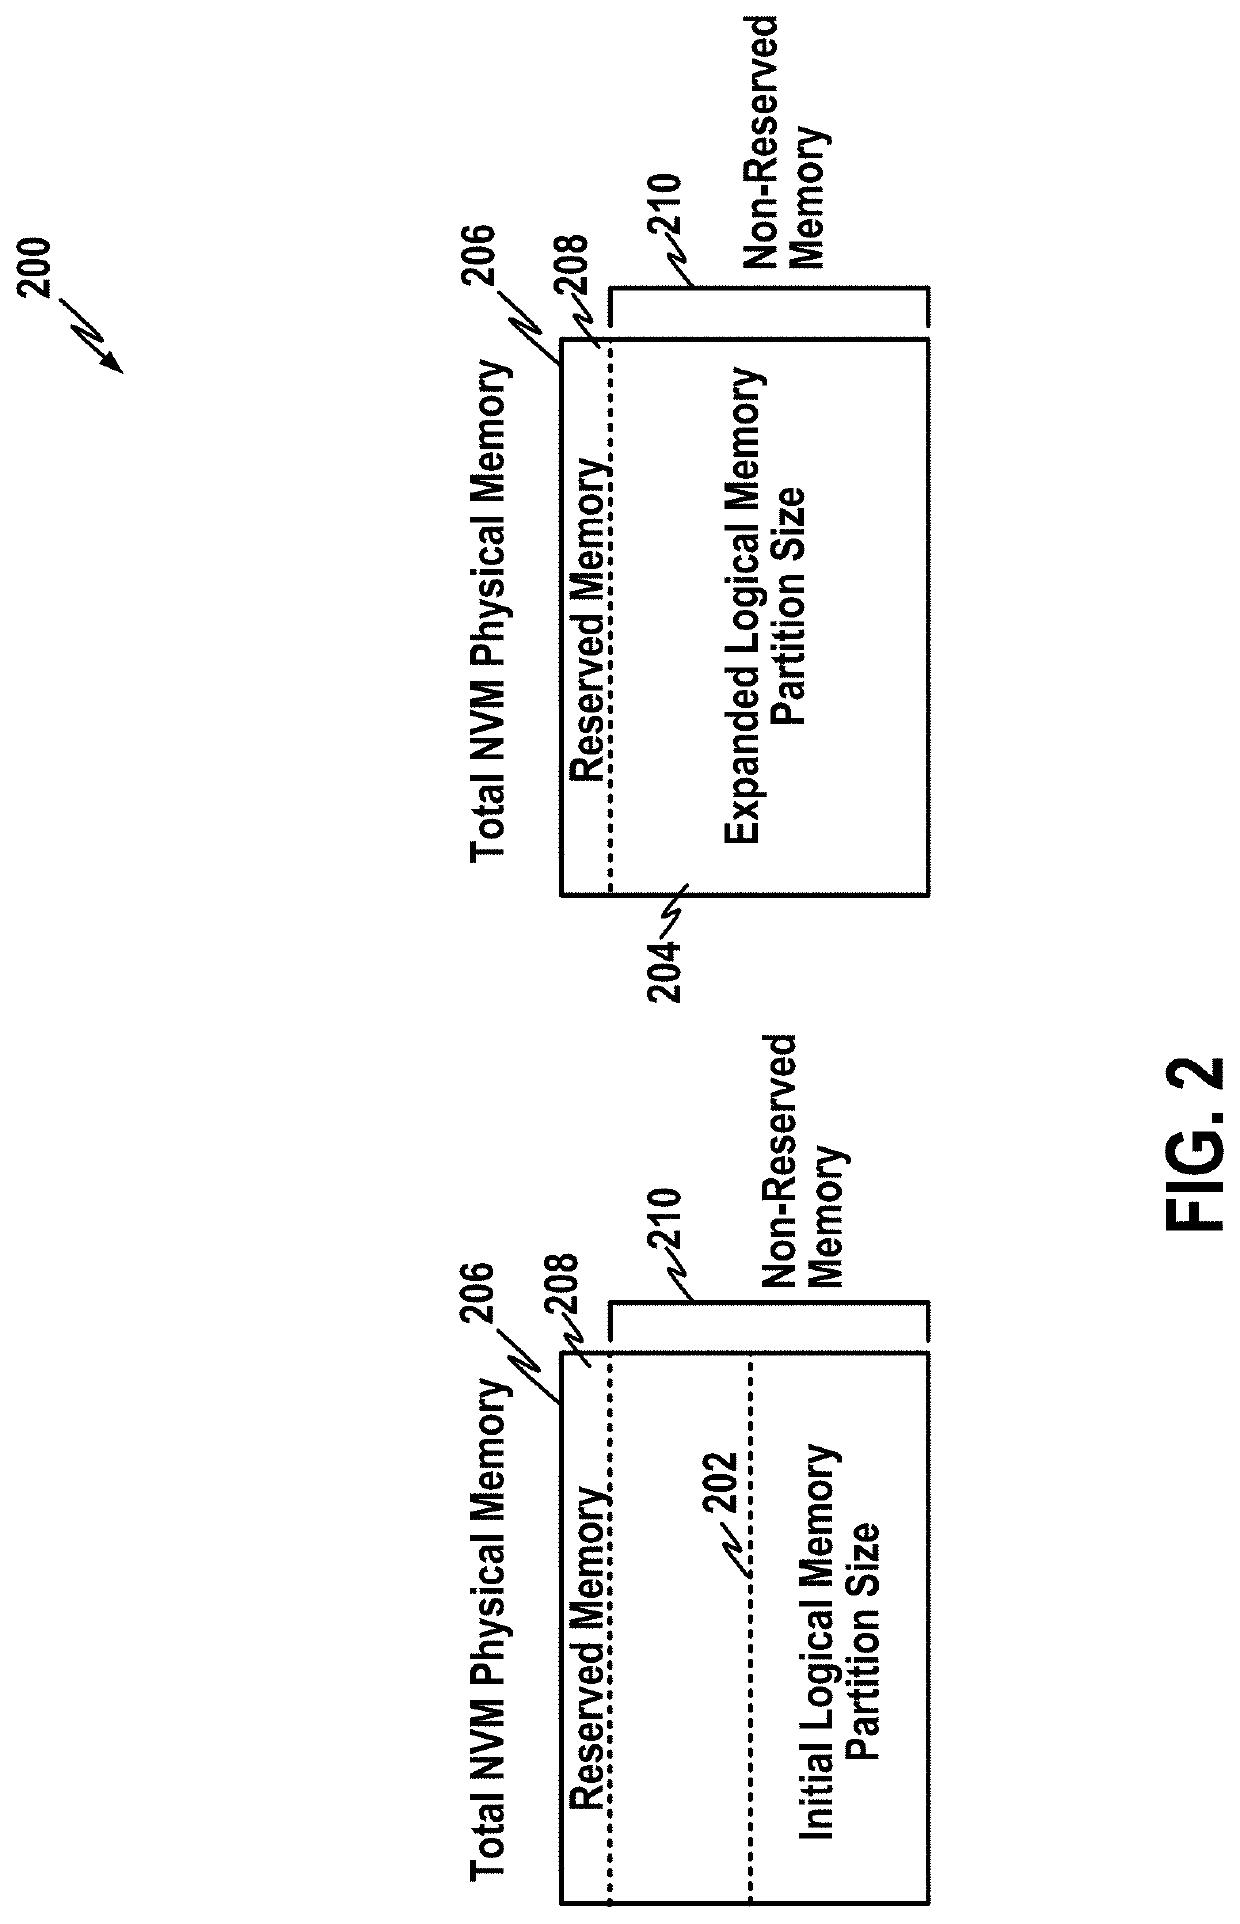 Expandable memory for use with solid state systems and devices